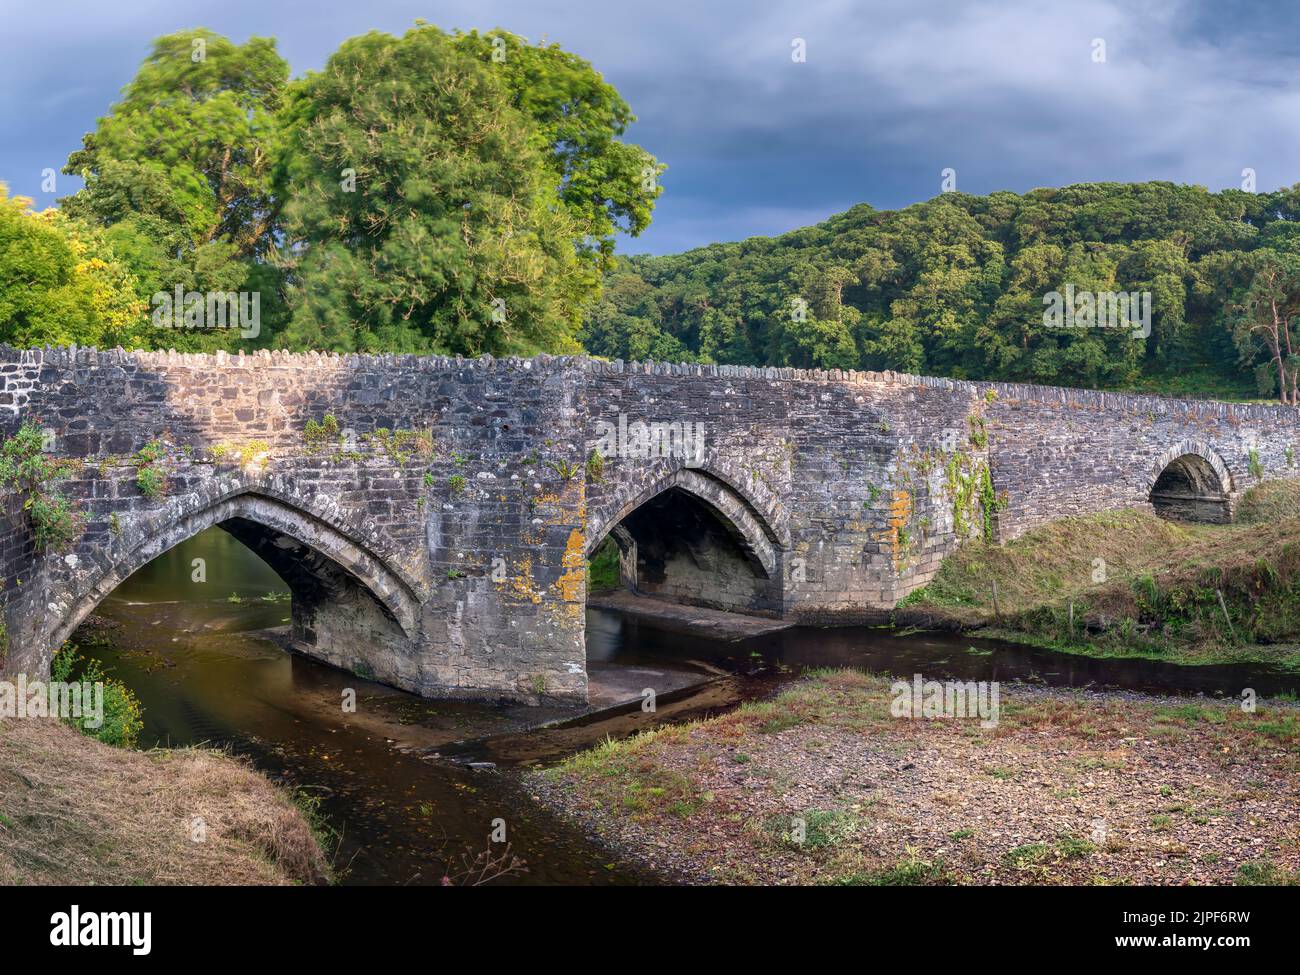 Yeolmbridge, Cornwall - The Grade I listed Yeolm Bridge, which gives the village its name,  spans the River Ottery. The 'Scheduled Ancient Monument' w Stock Photo